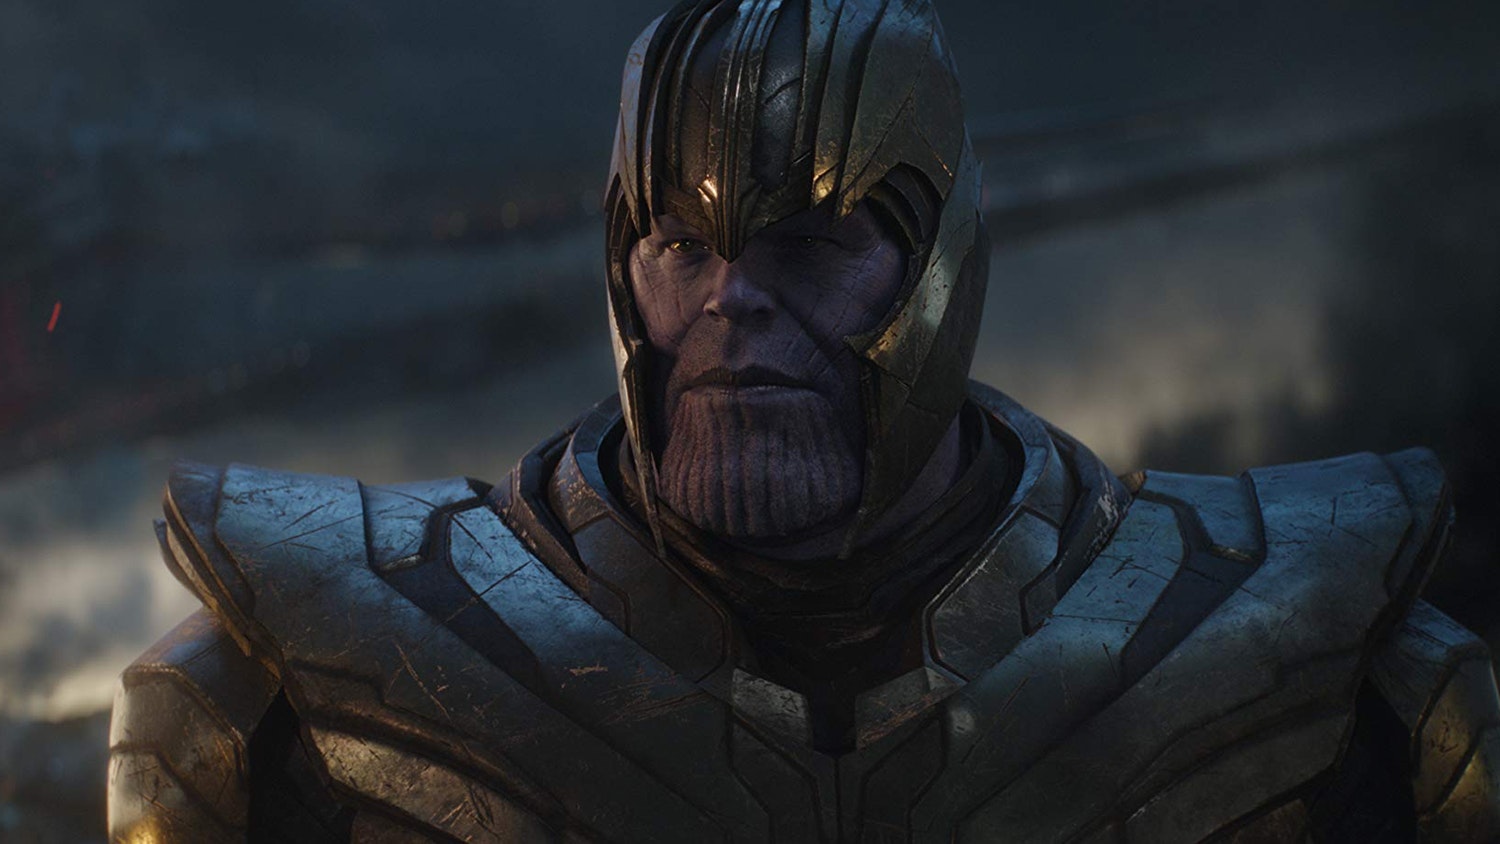 The 'Endgame' Credits Pay Homage To The Original Avengers & It's